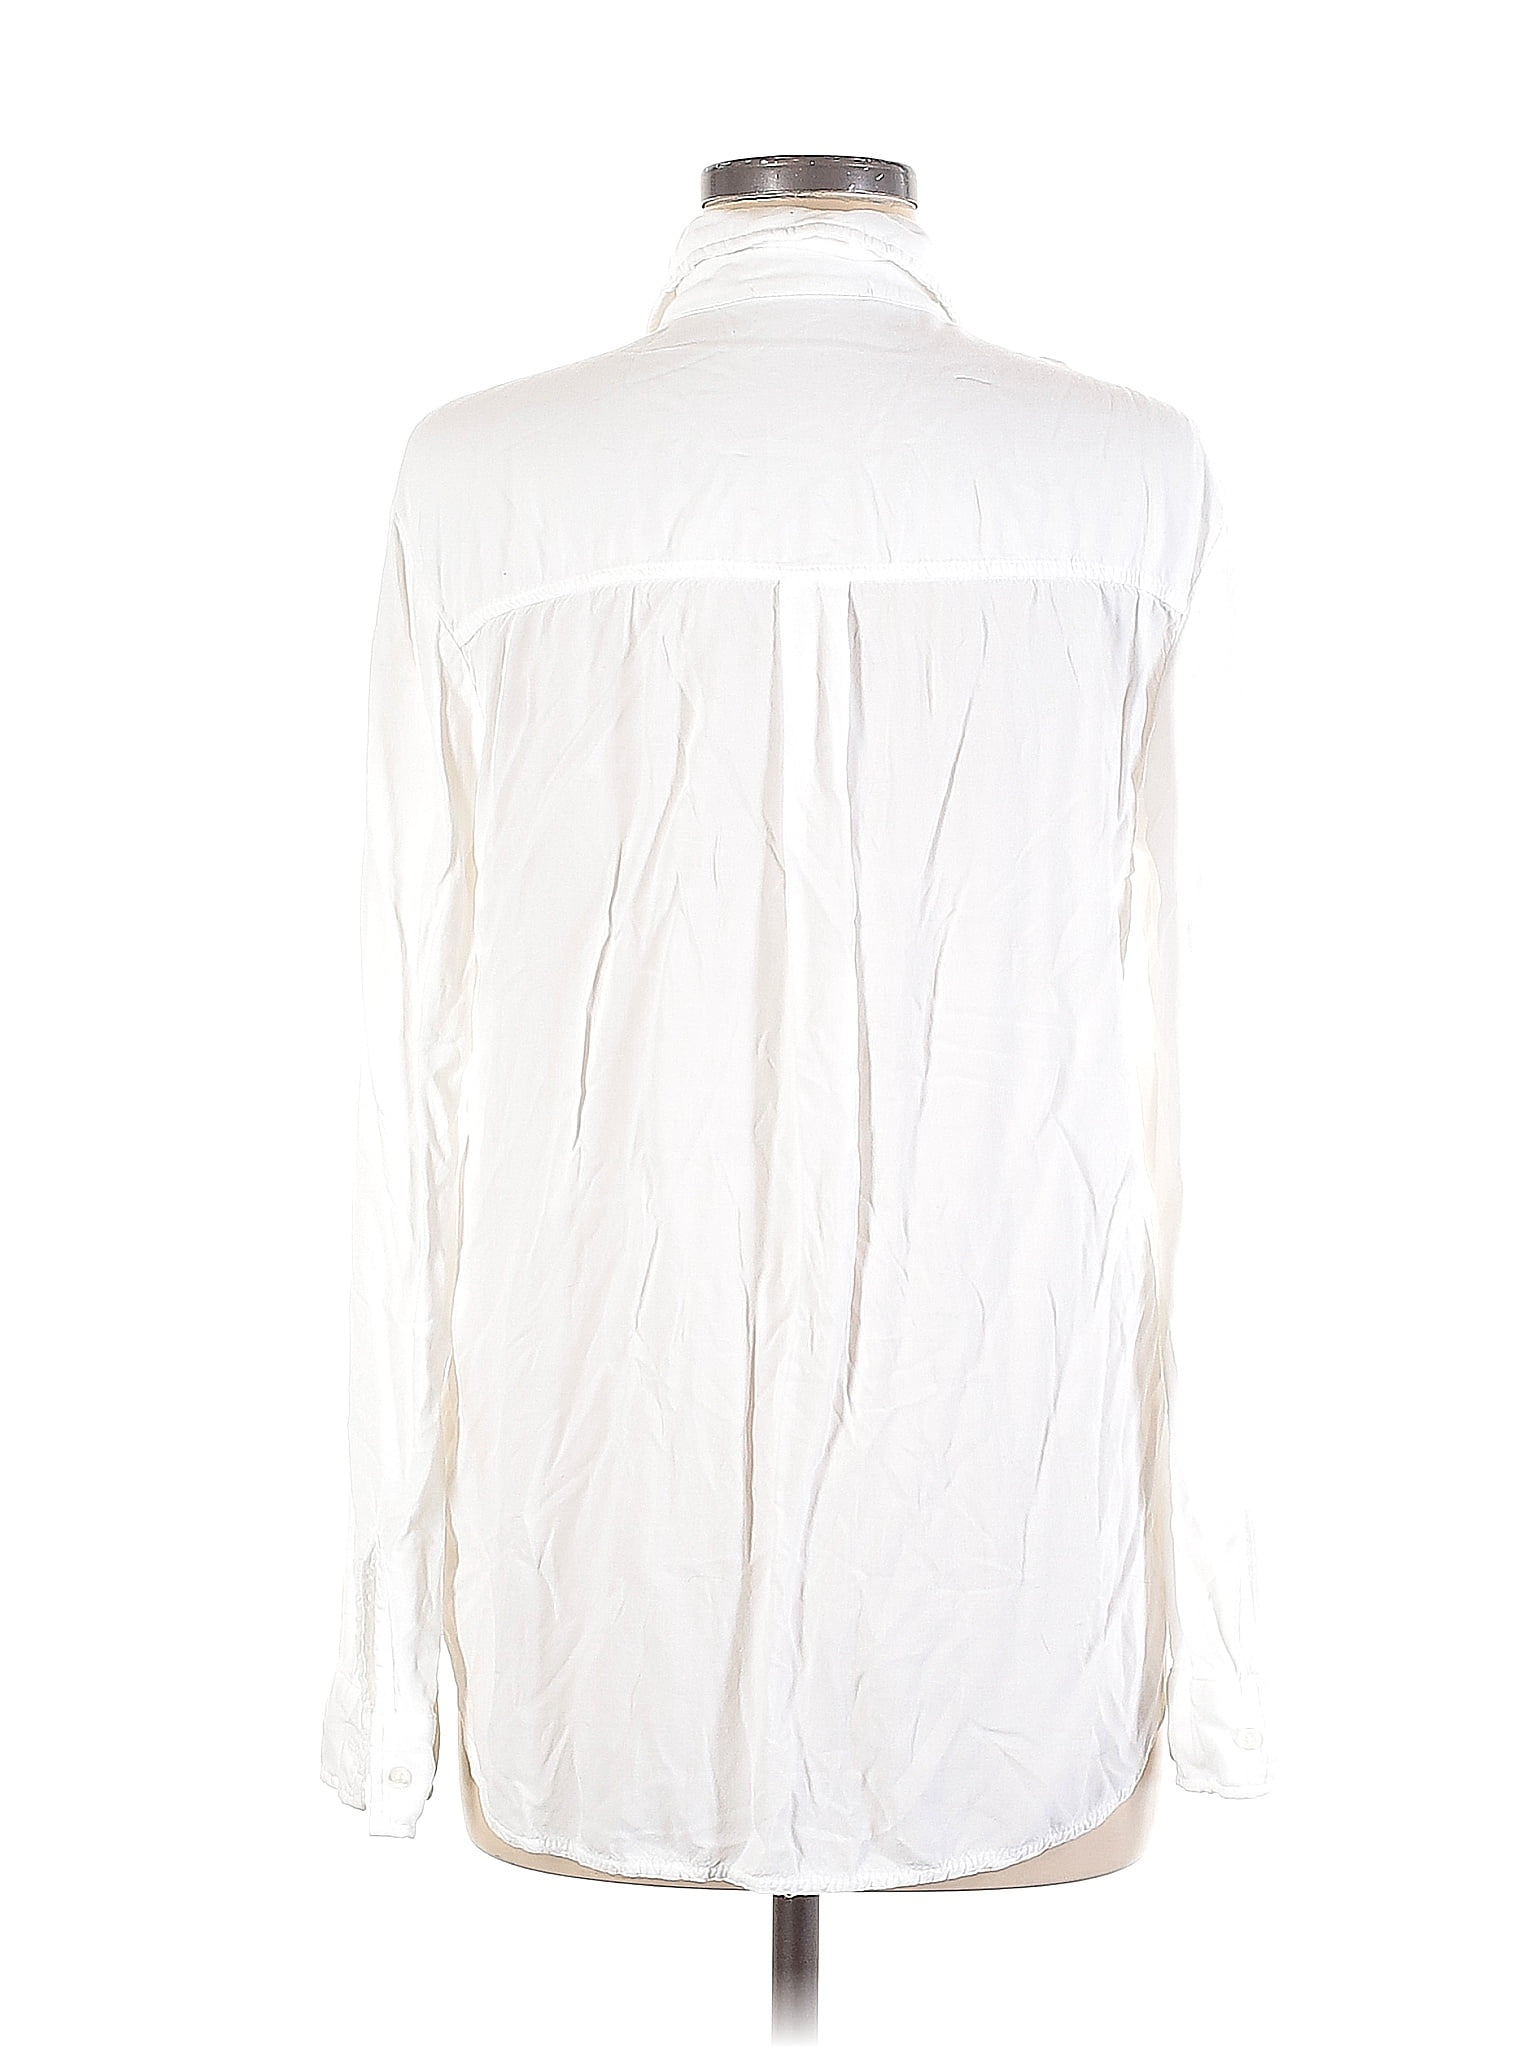 Brandy Melville Solid White Long Sleeve Button-Down Shirt One Size - 44%  off